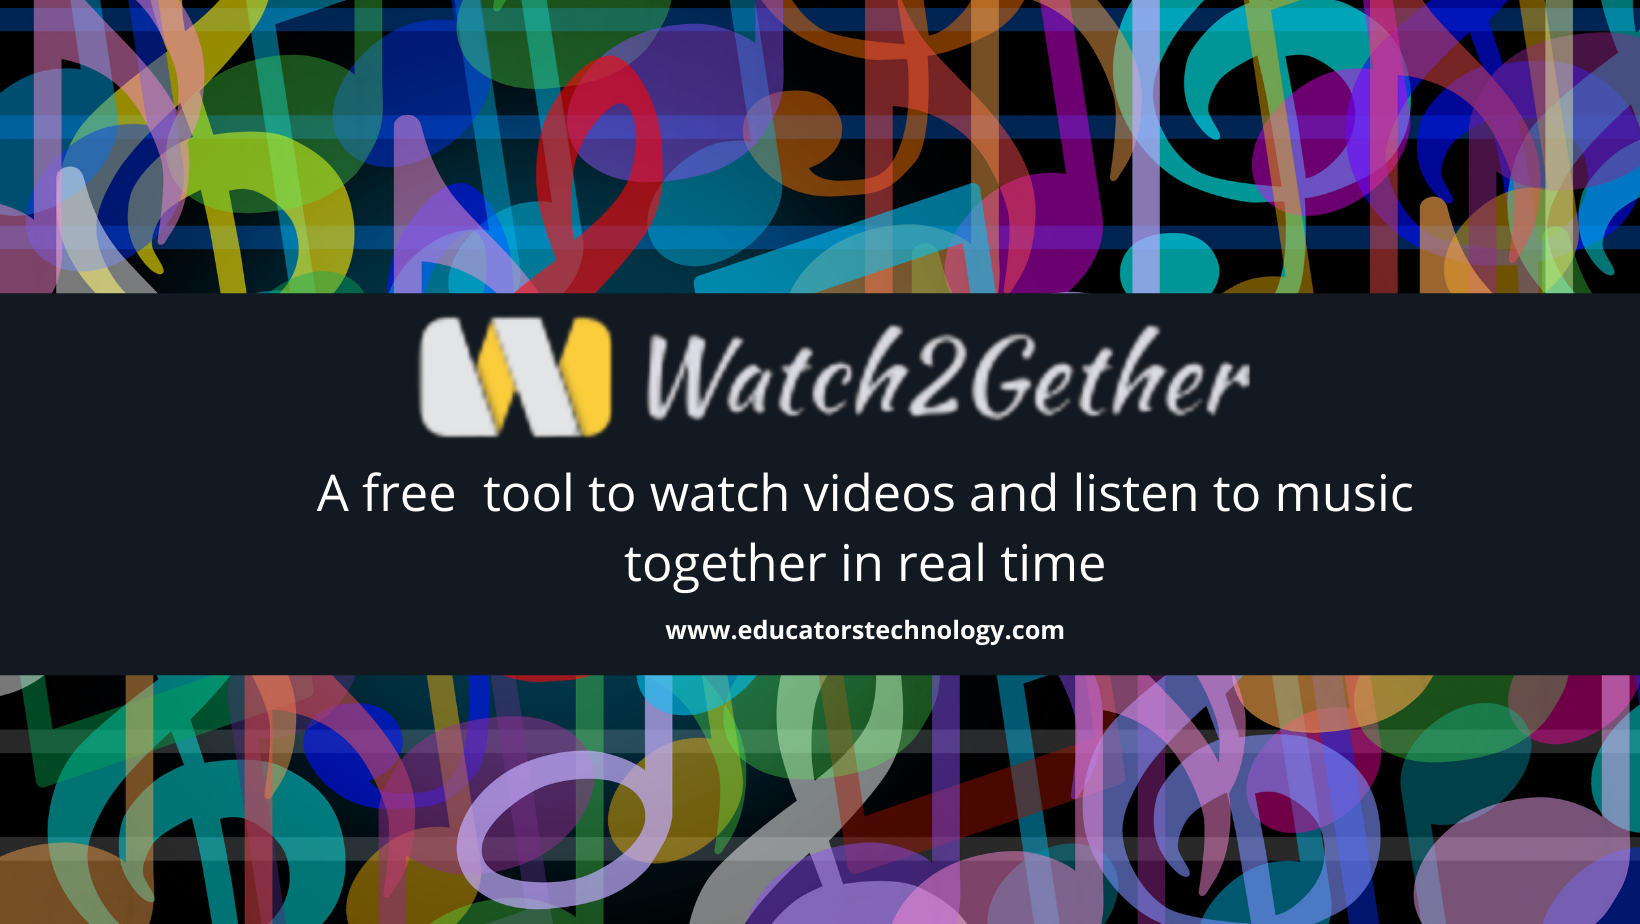 Watch2Gether- Watch Videos Together in Real Time